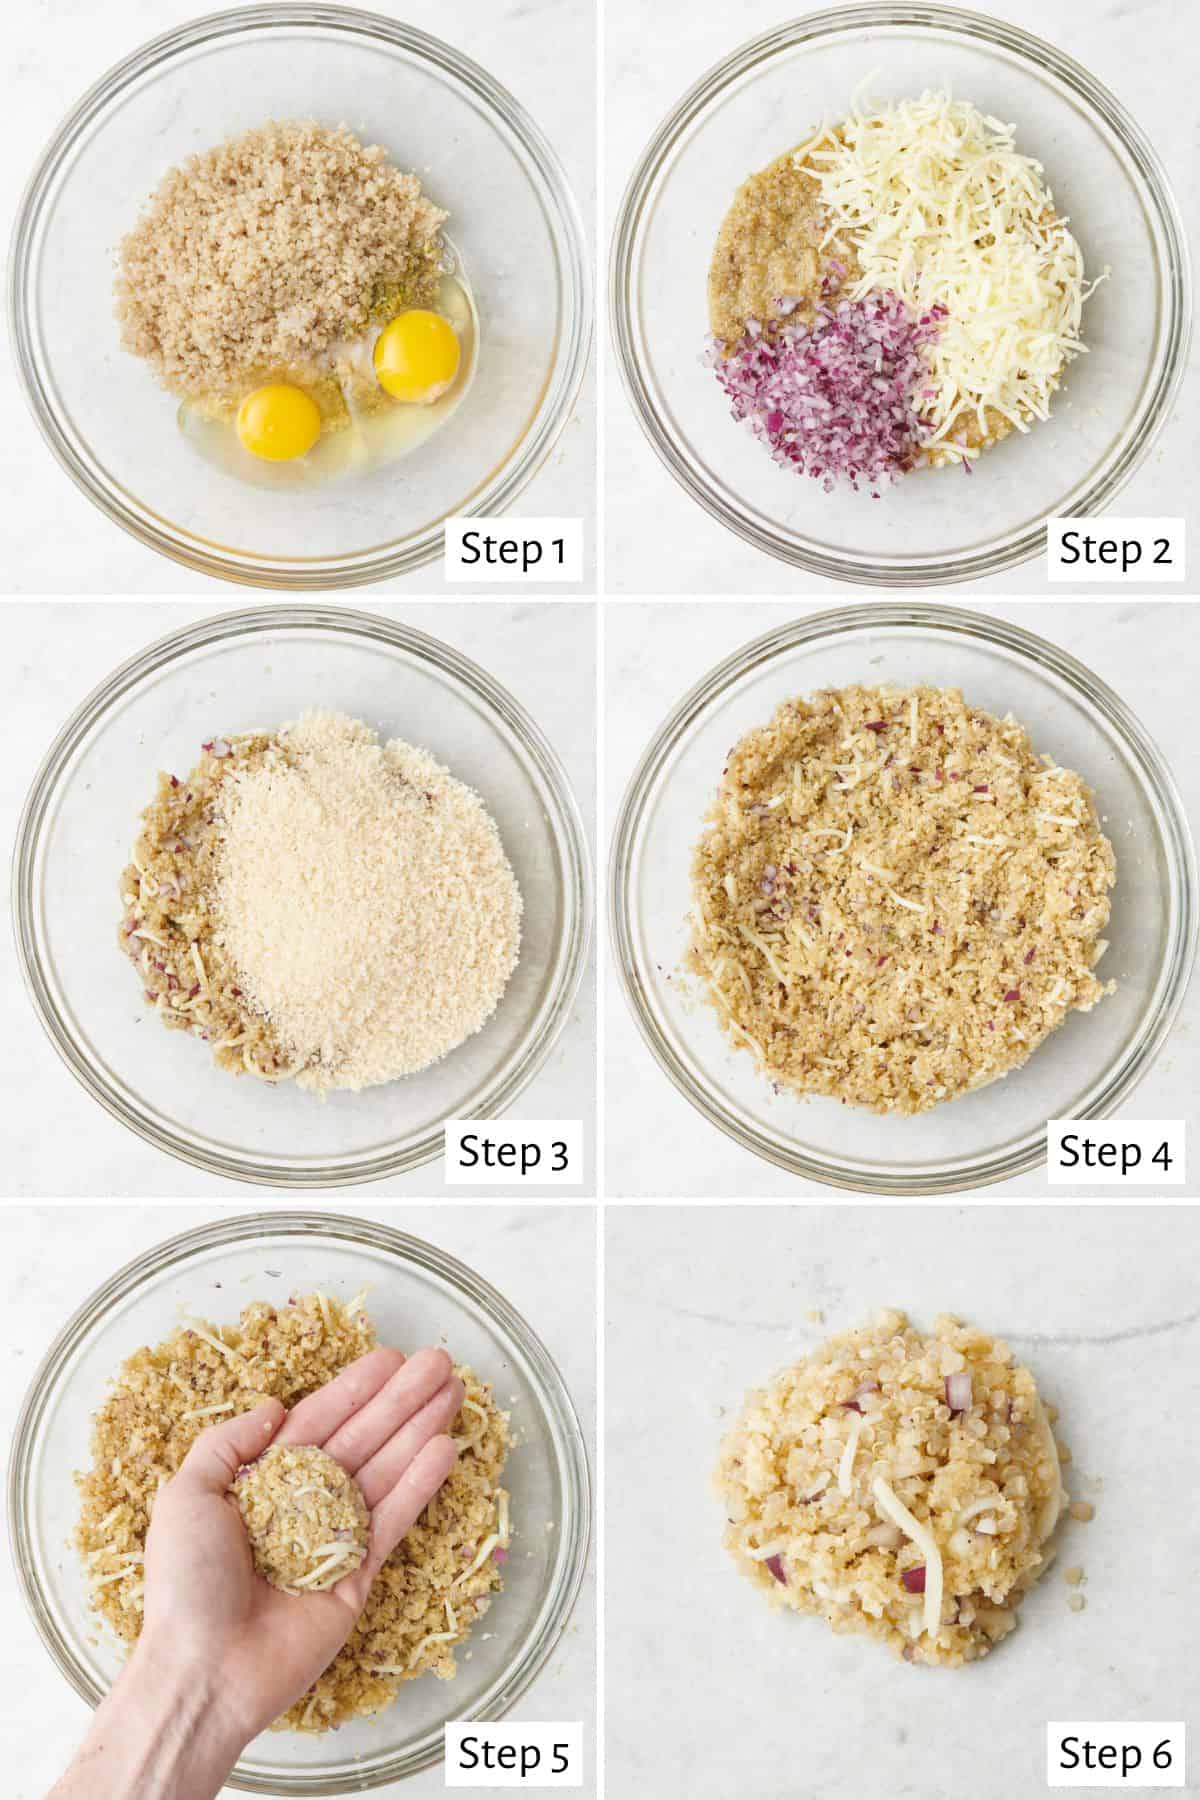 6 image collage making recipe: 1- quinoa and eggs in a bowl, 2- after mixing with shredded cheese and chopped red onions added, 3- after mixing with breadcrumbs added, 4- after combined, 5- forming in to a ball, 6- shaping into a patty.